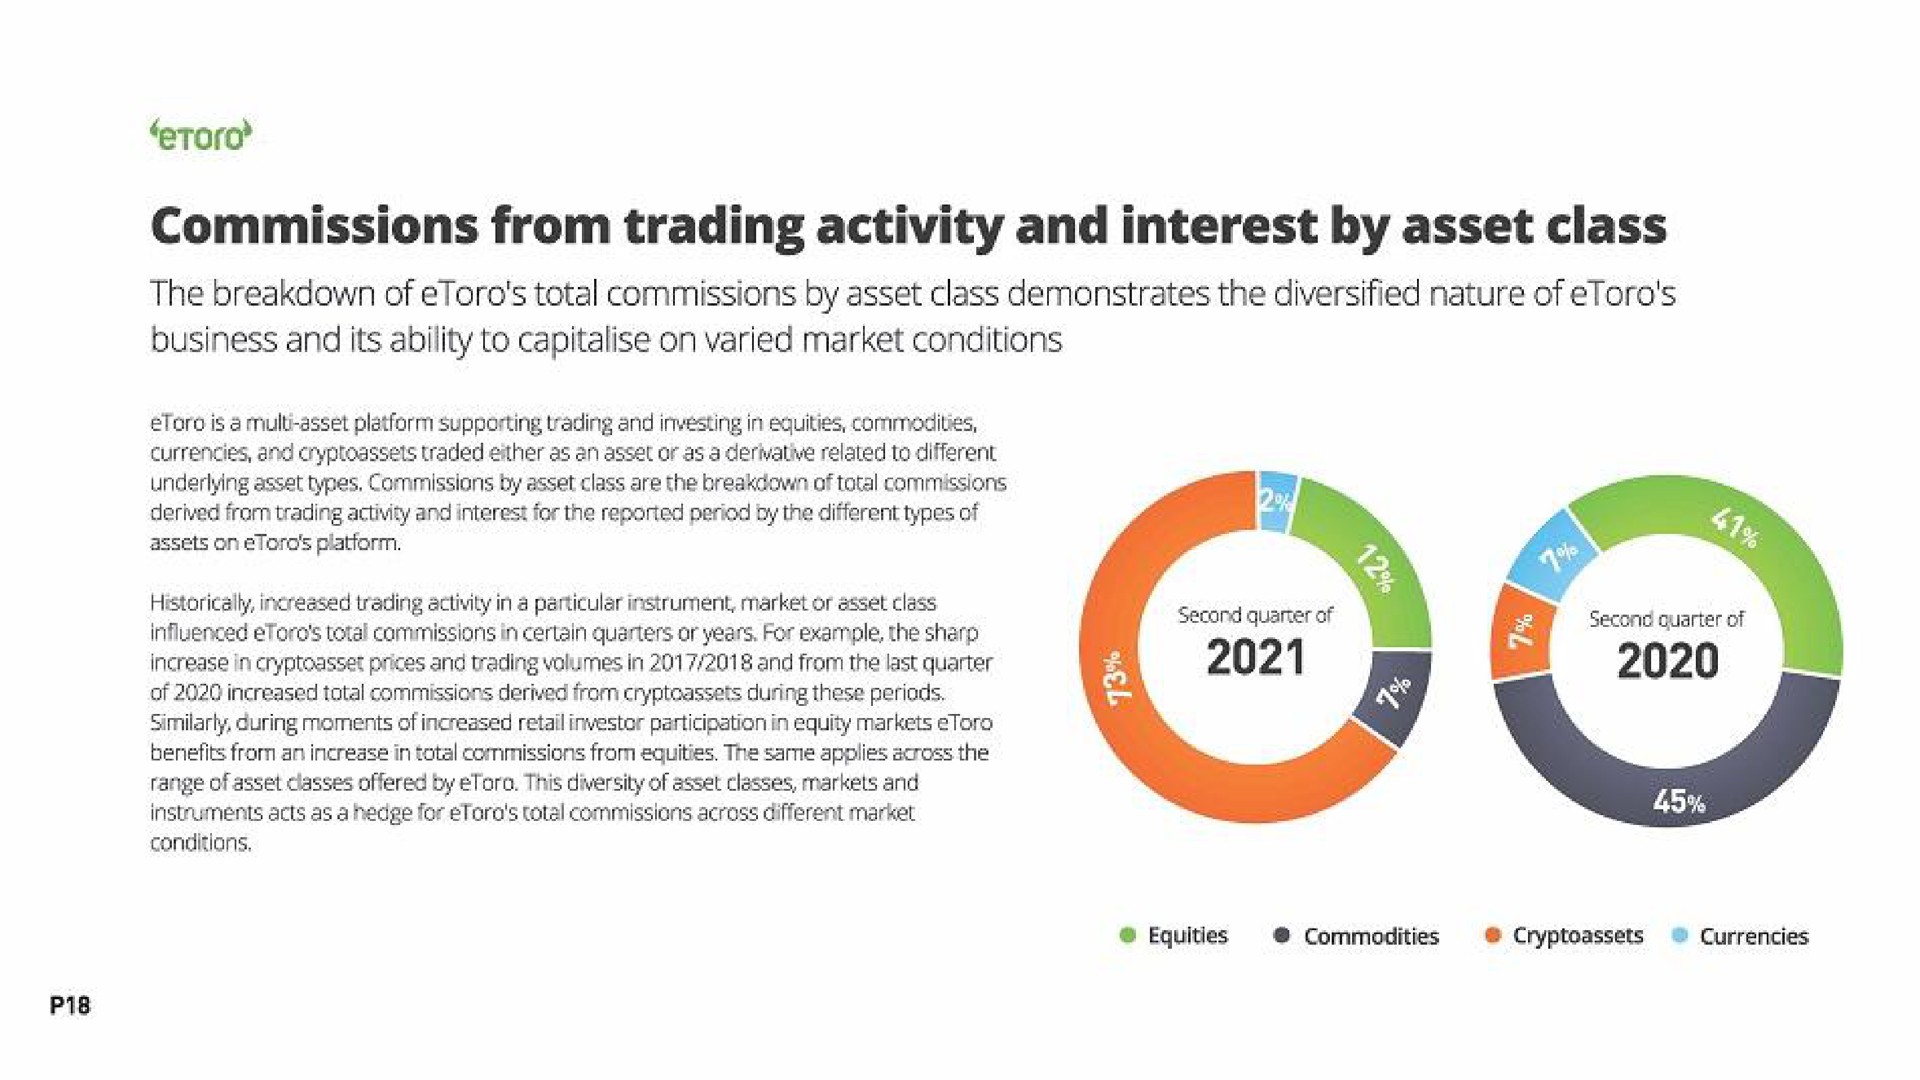 commissions from trading activity and interest by asset class the breakdown of total commissions by asset class demonstrates the diversified nature of business and its ability to on varied market conditions | eToro